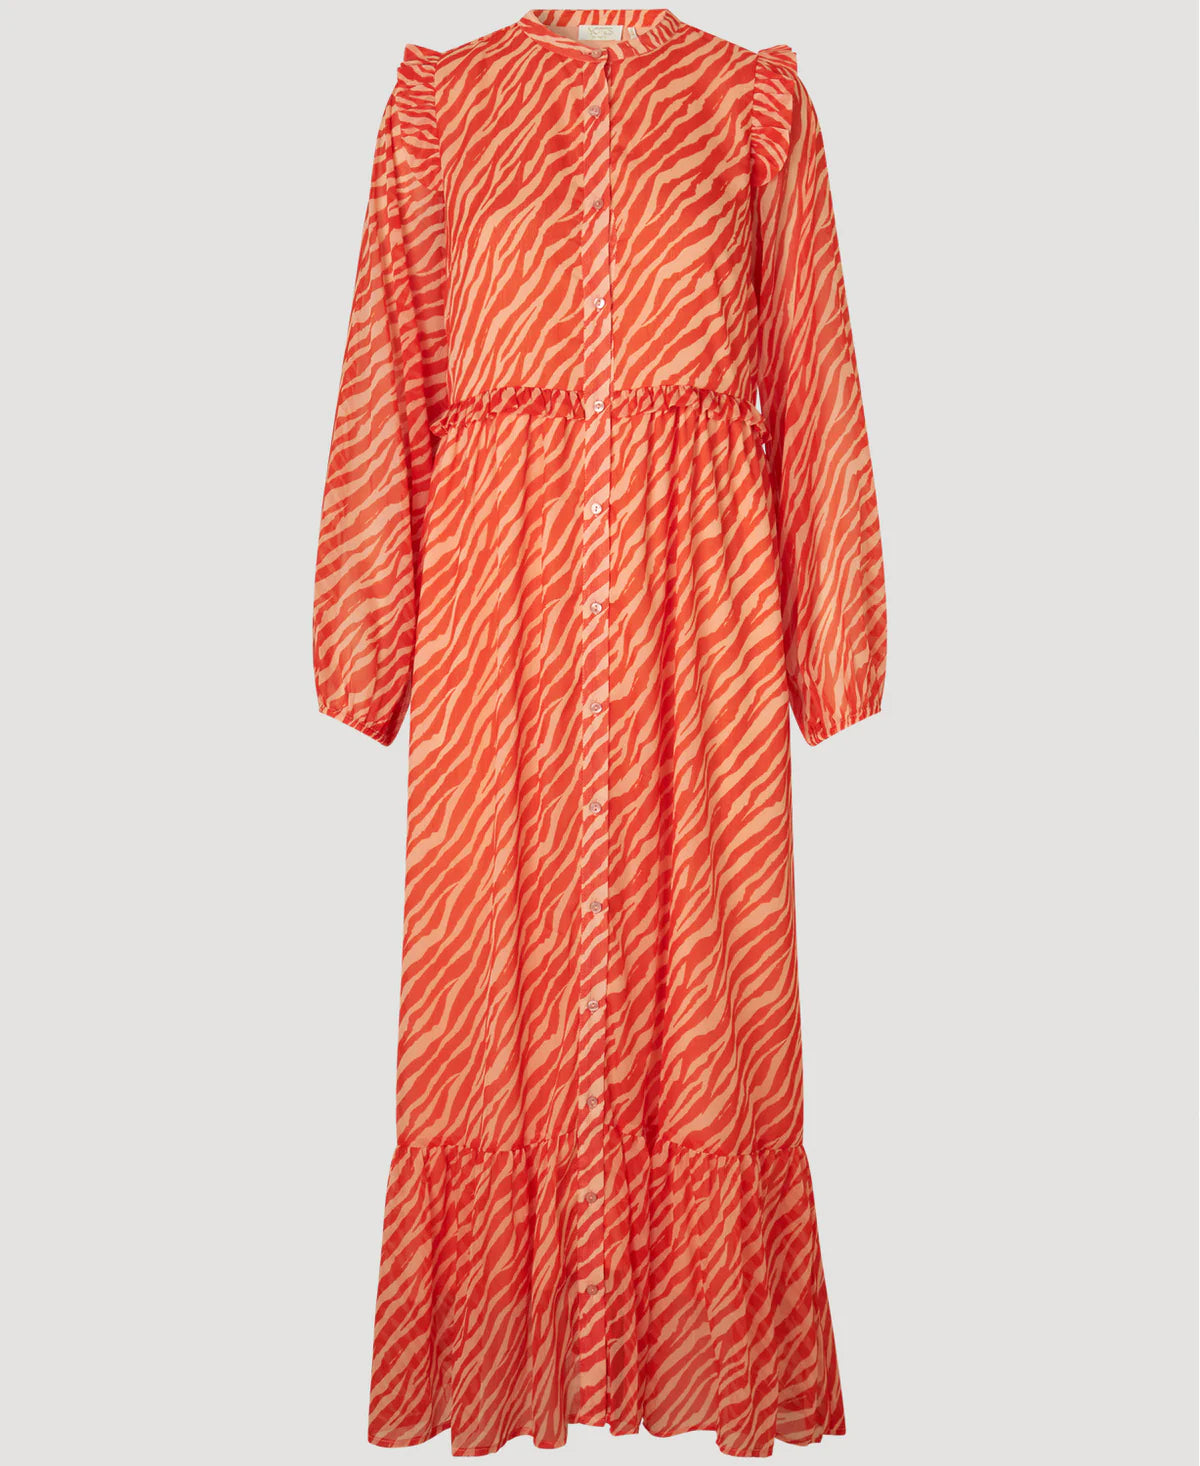 NDN - Genny Recycled Maxi Dress